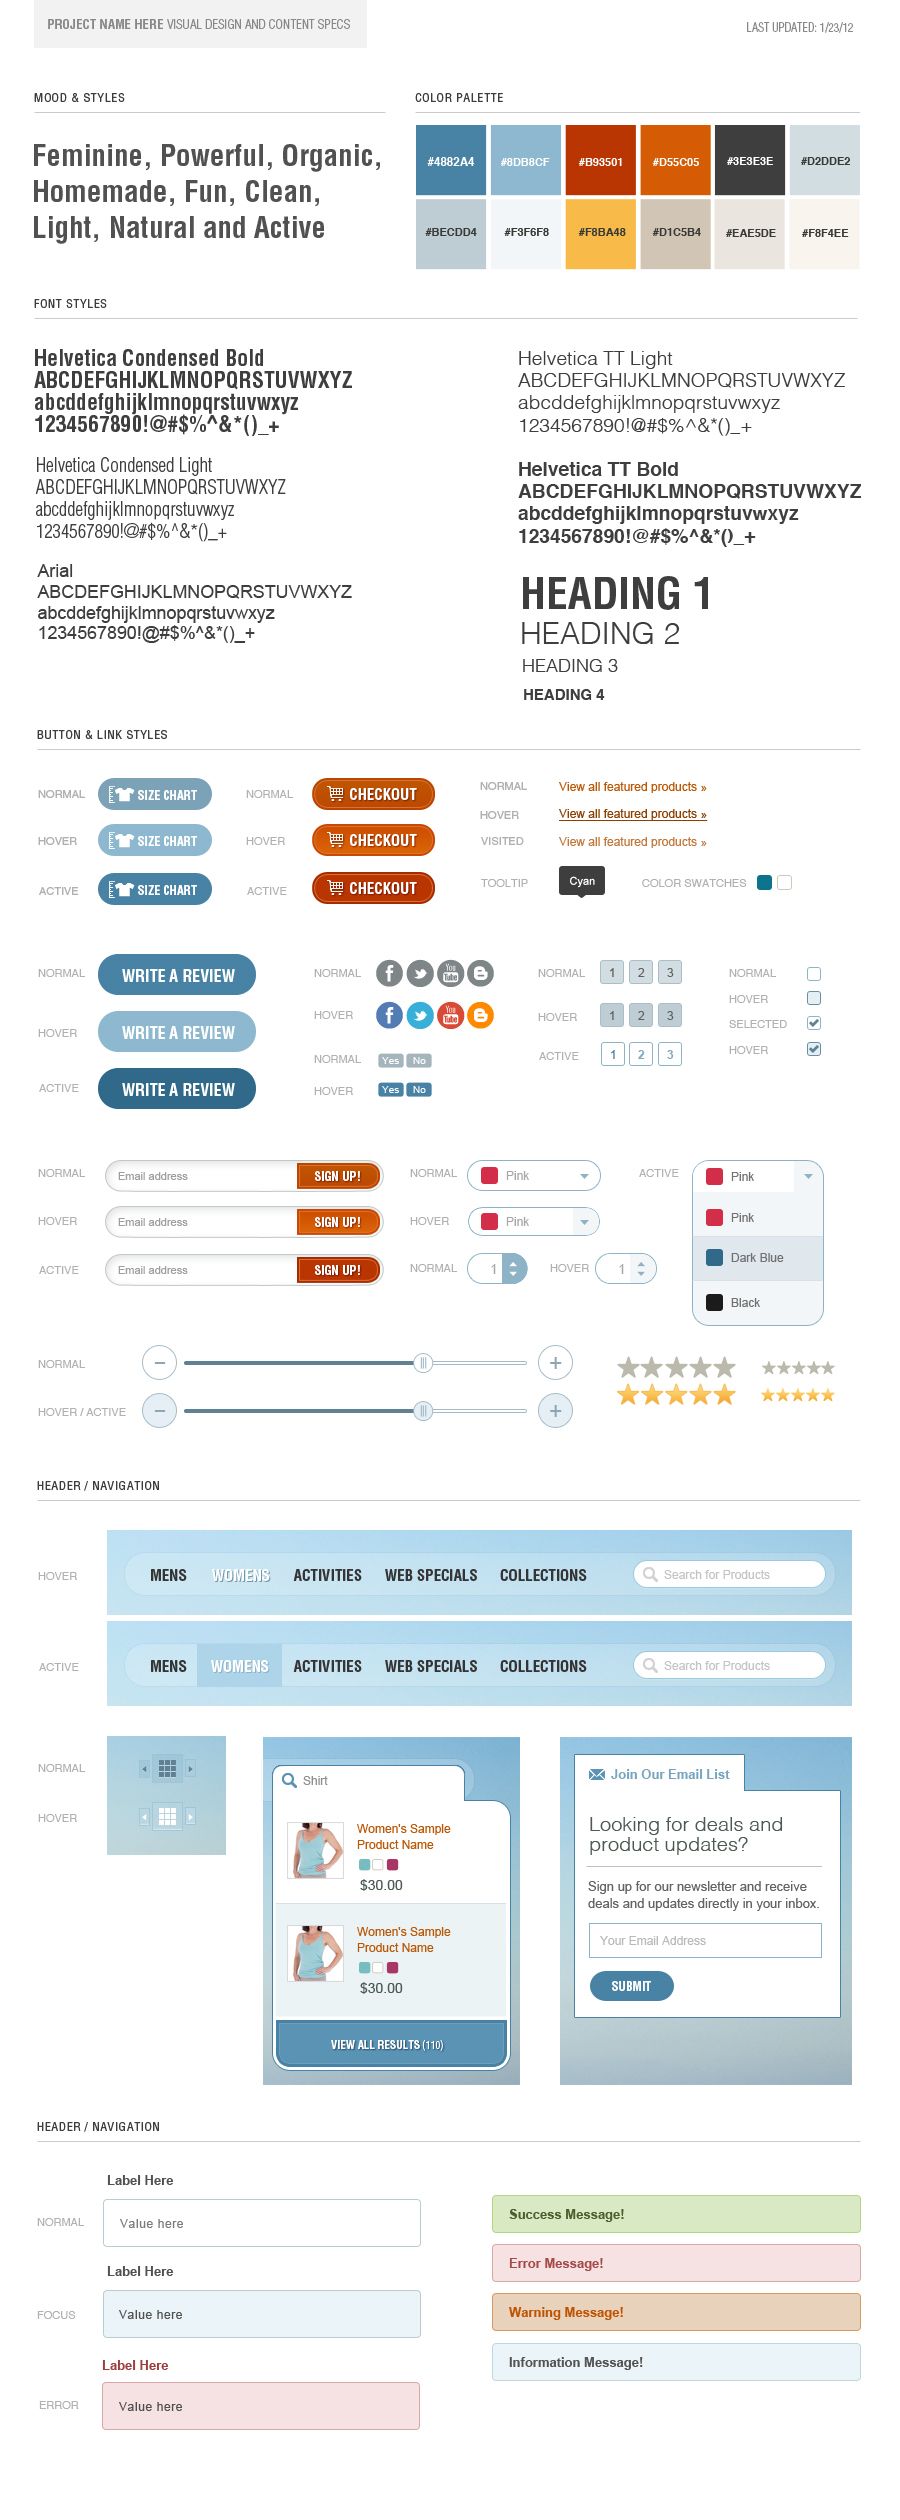 web design style guide examples